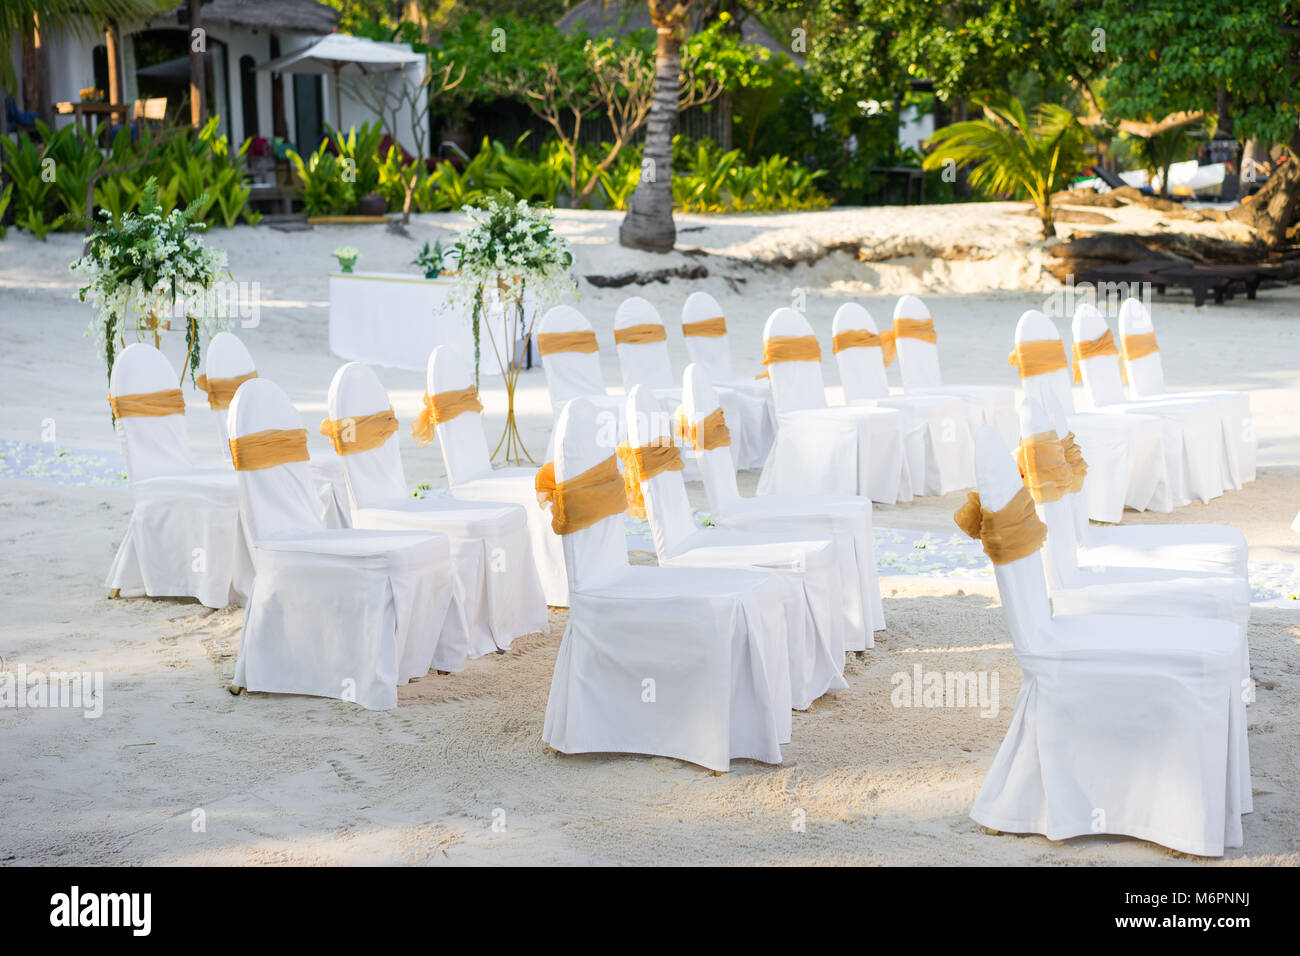 A group of white spandex chairs cover with gold organza sash for beach wedding venue Stock Photo